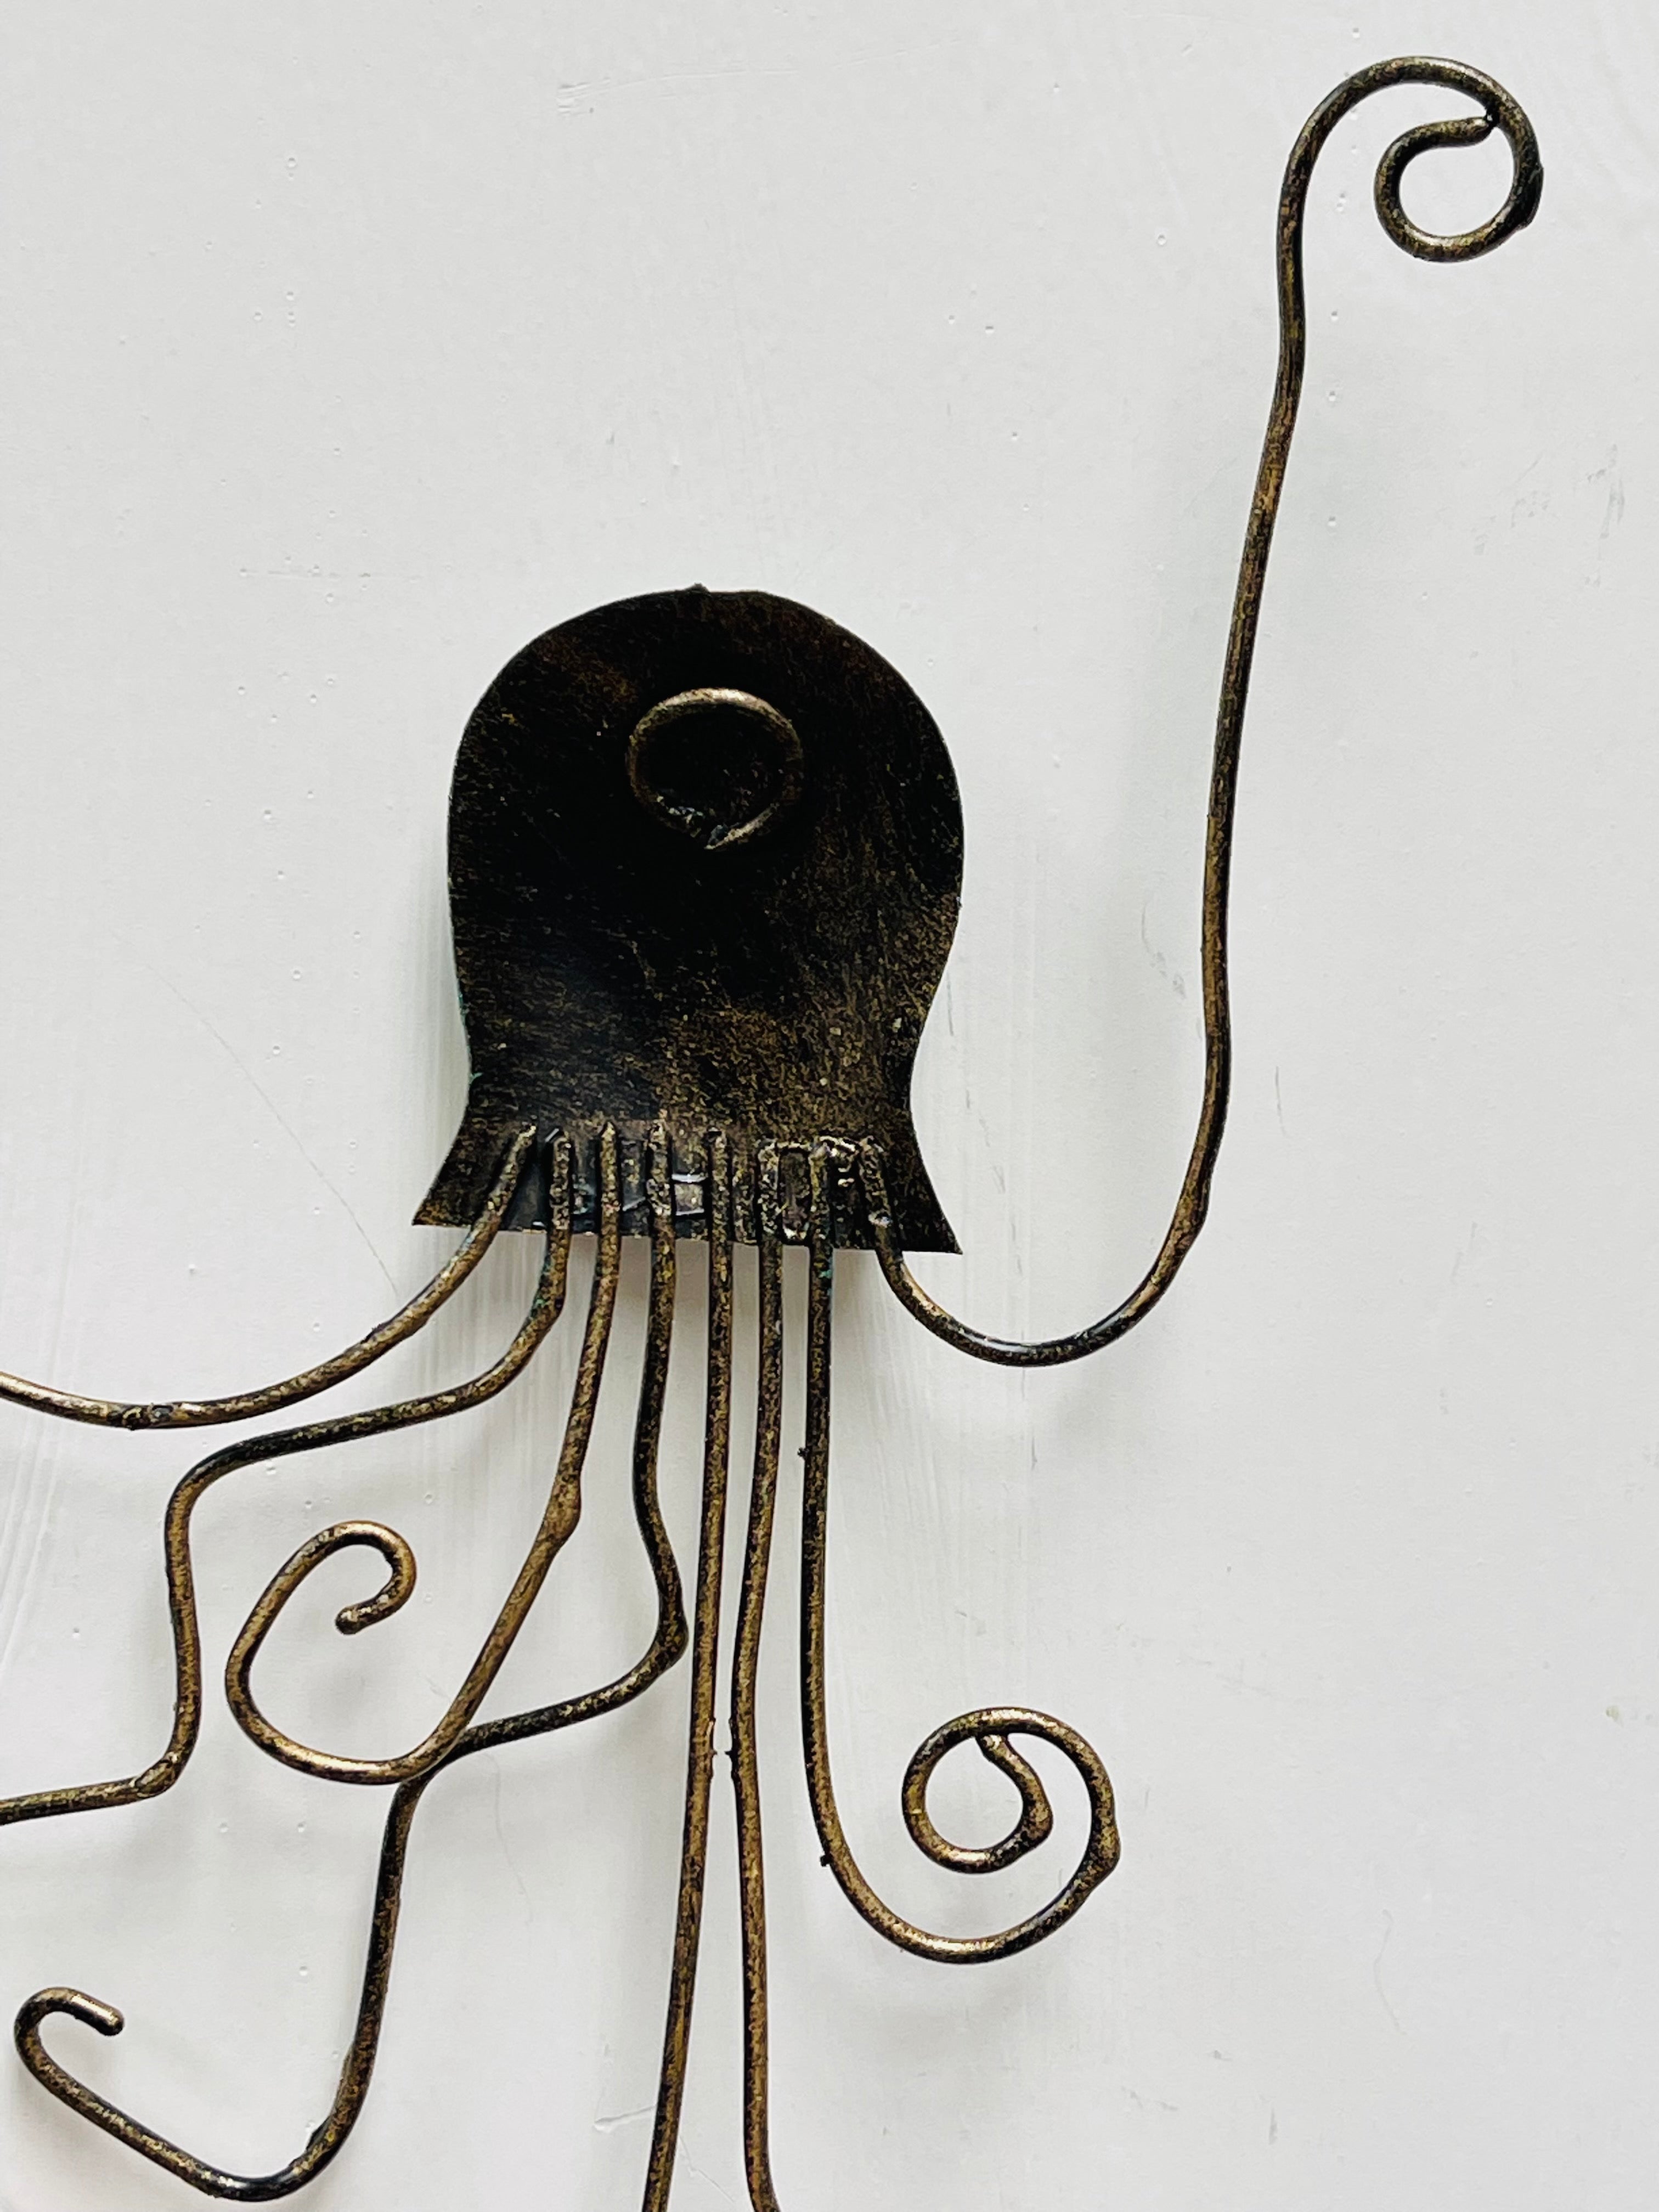 back view of metal octopus with hook attached